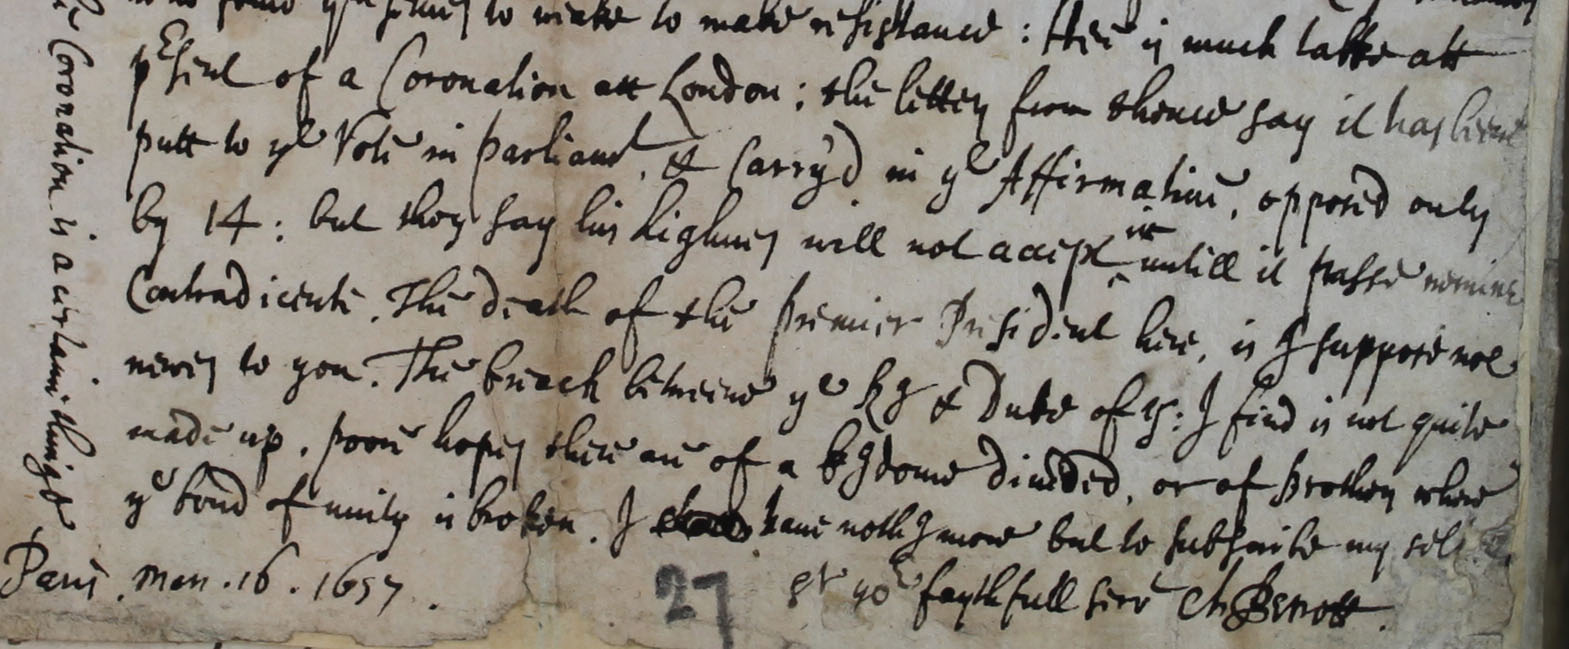 Extract from letter from Charles Perrott to Williamson, 6th March 1657, (SP 18/154, f. 25)